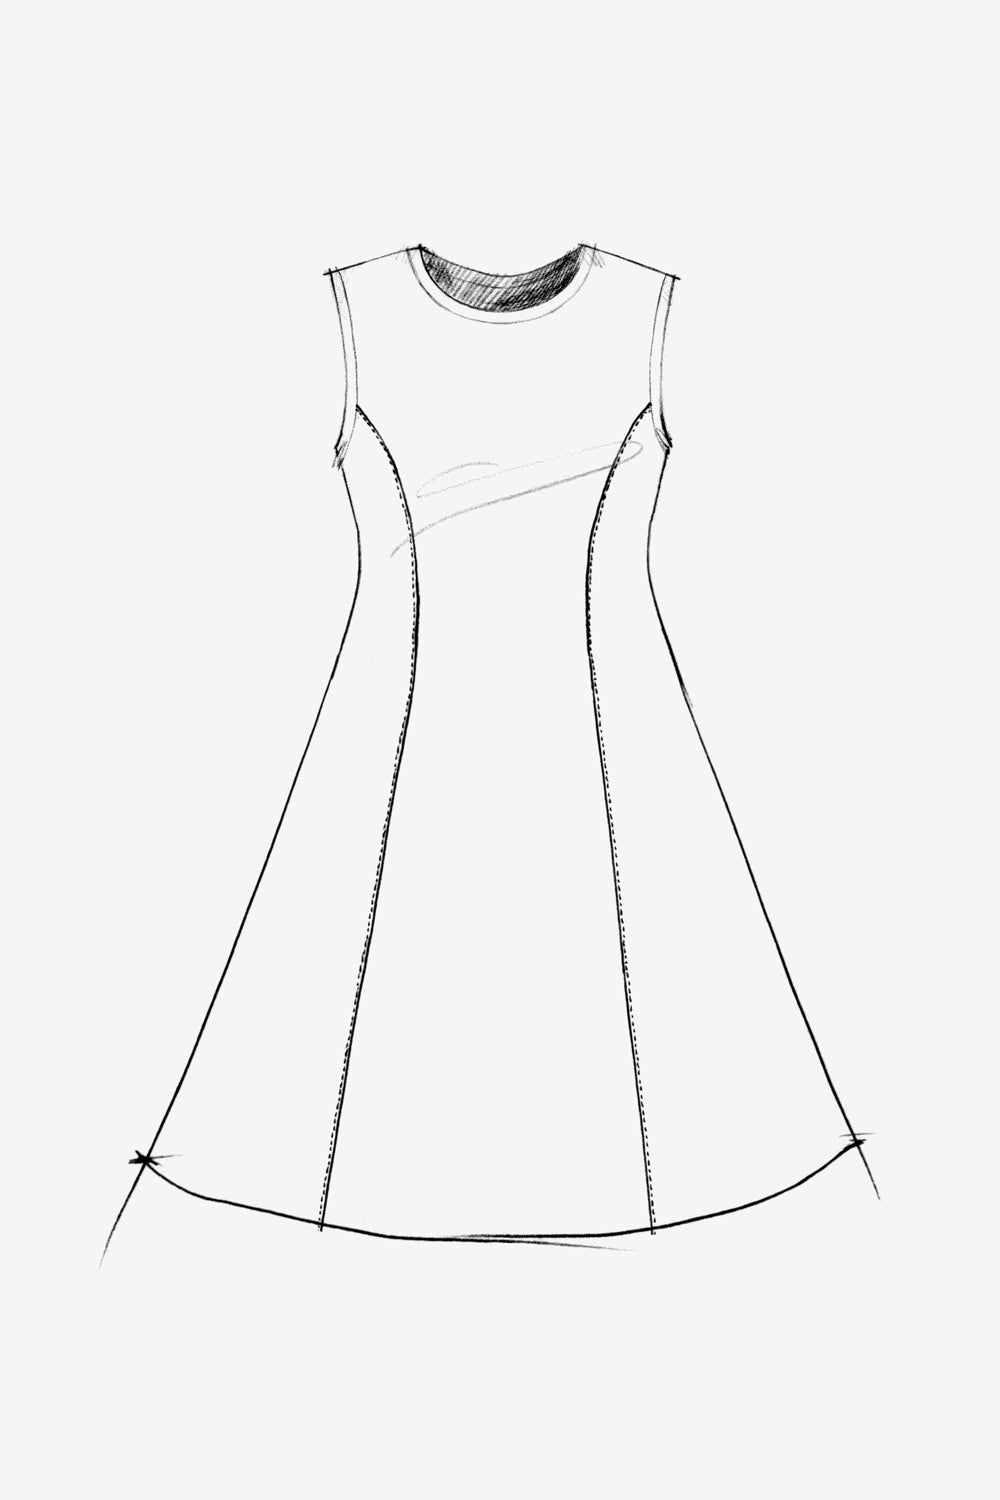 The School of Making The Factory Dress Pattern Women's DIY Clothing Pattern for Hand-Sewn Crew Neck Dress.